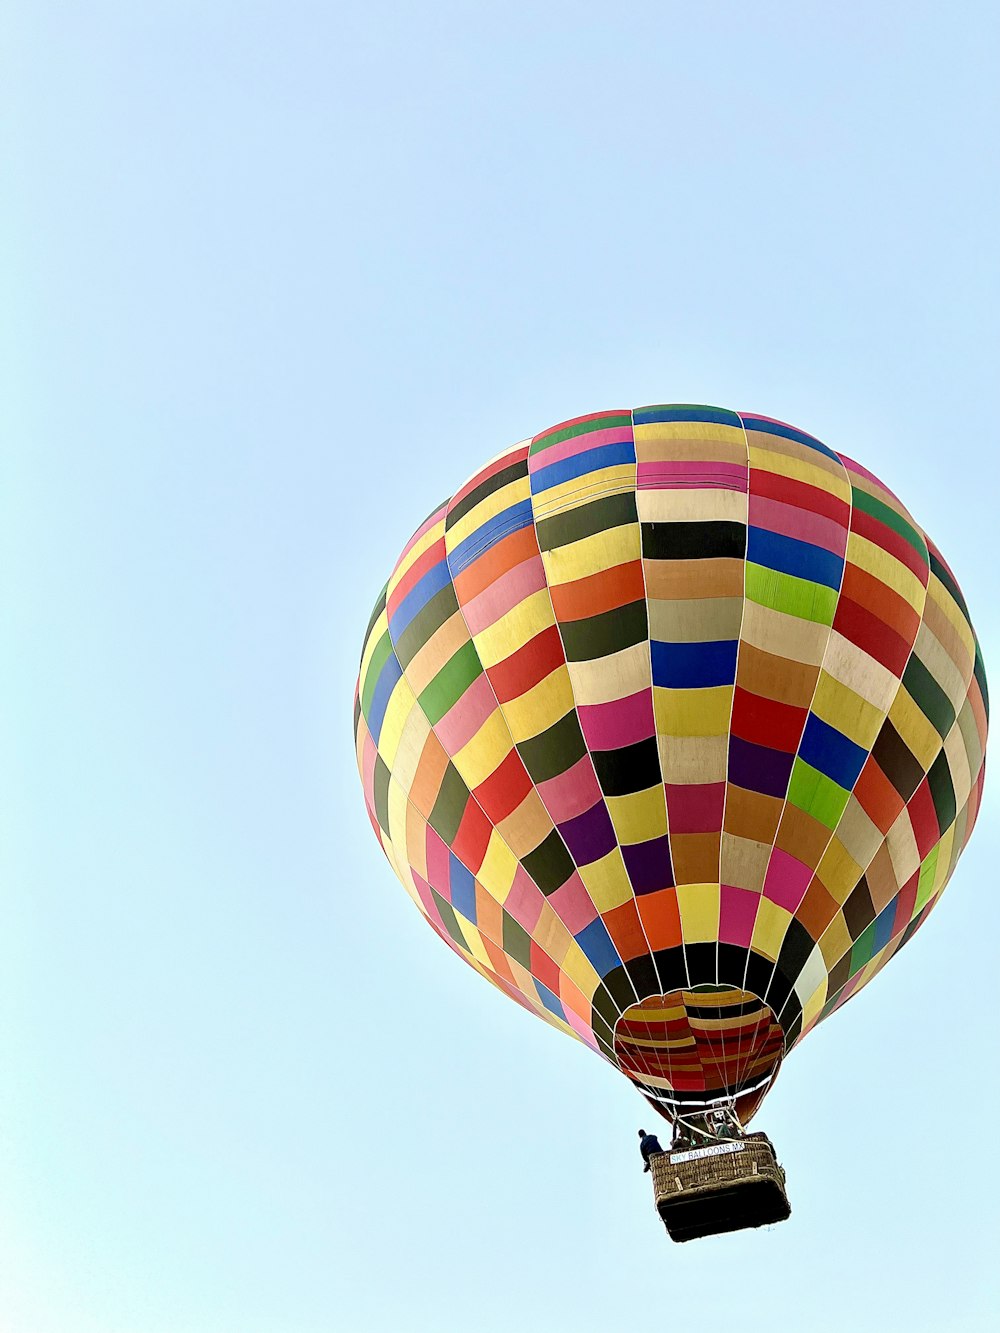 a multicolored hot air balloon flying in a blue sky